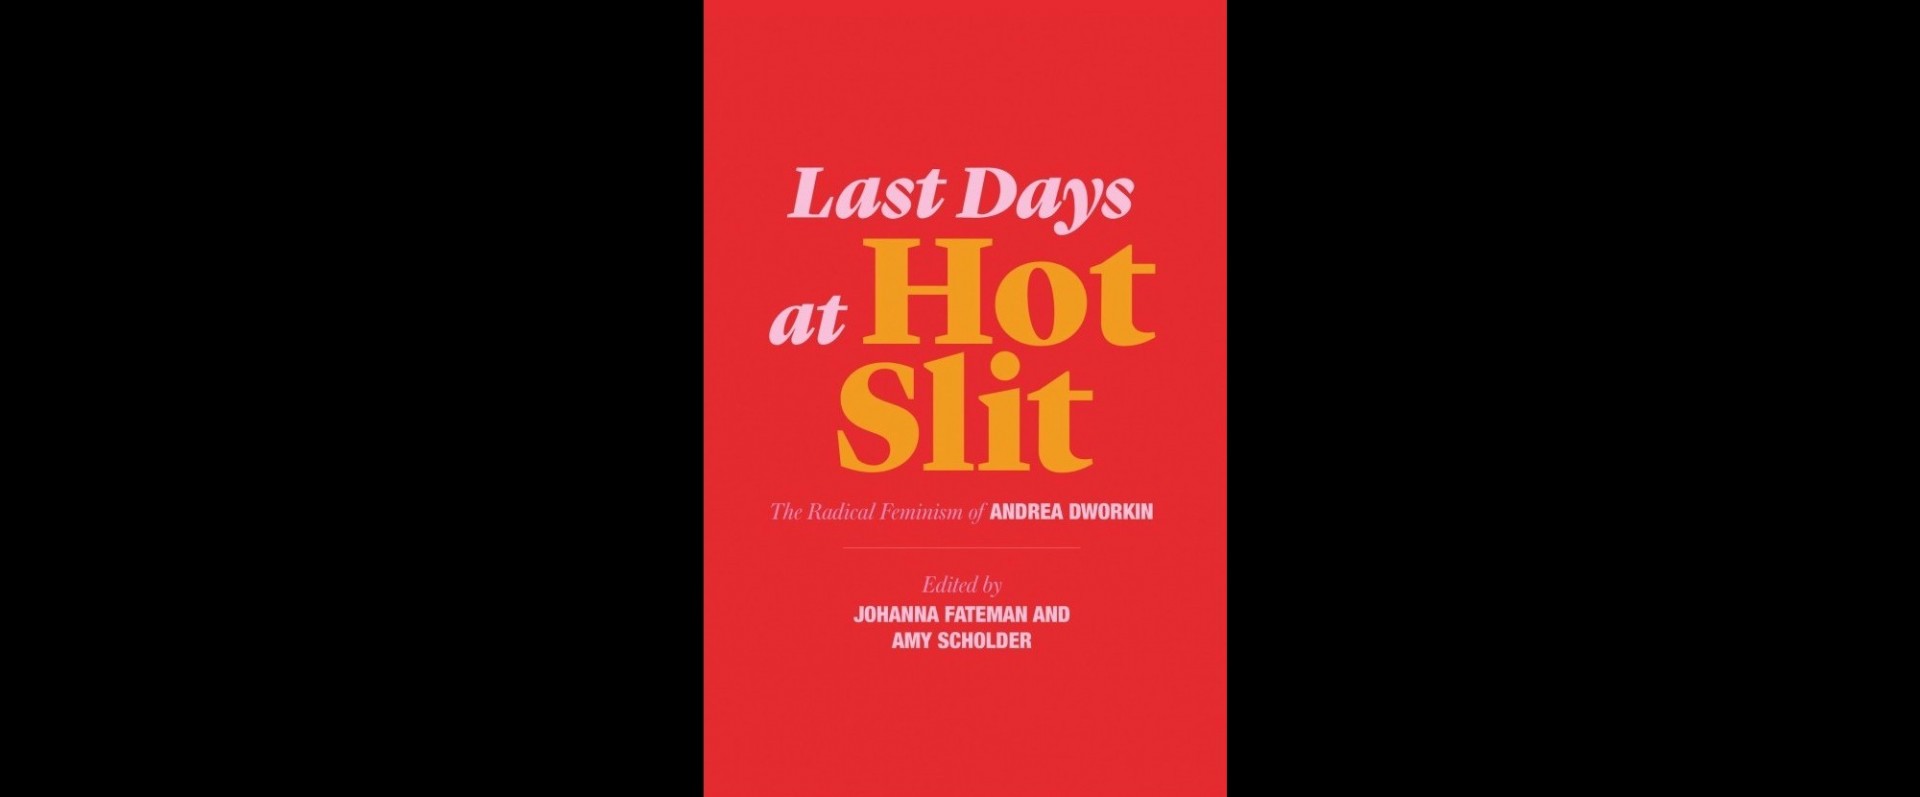 *LAST DAYS AT HOT SLIT: The Radical Feminism of Andrea Dworkin*